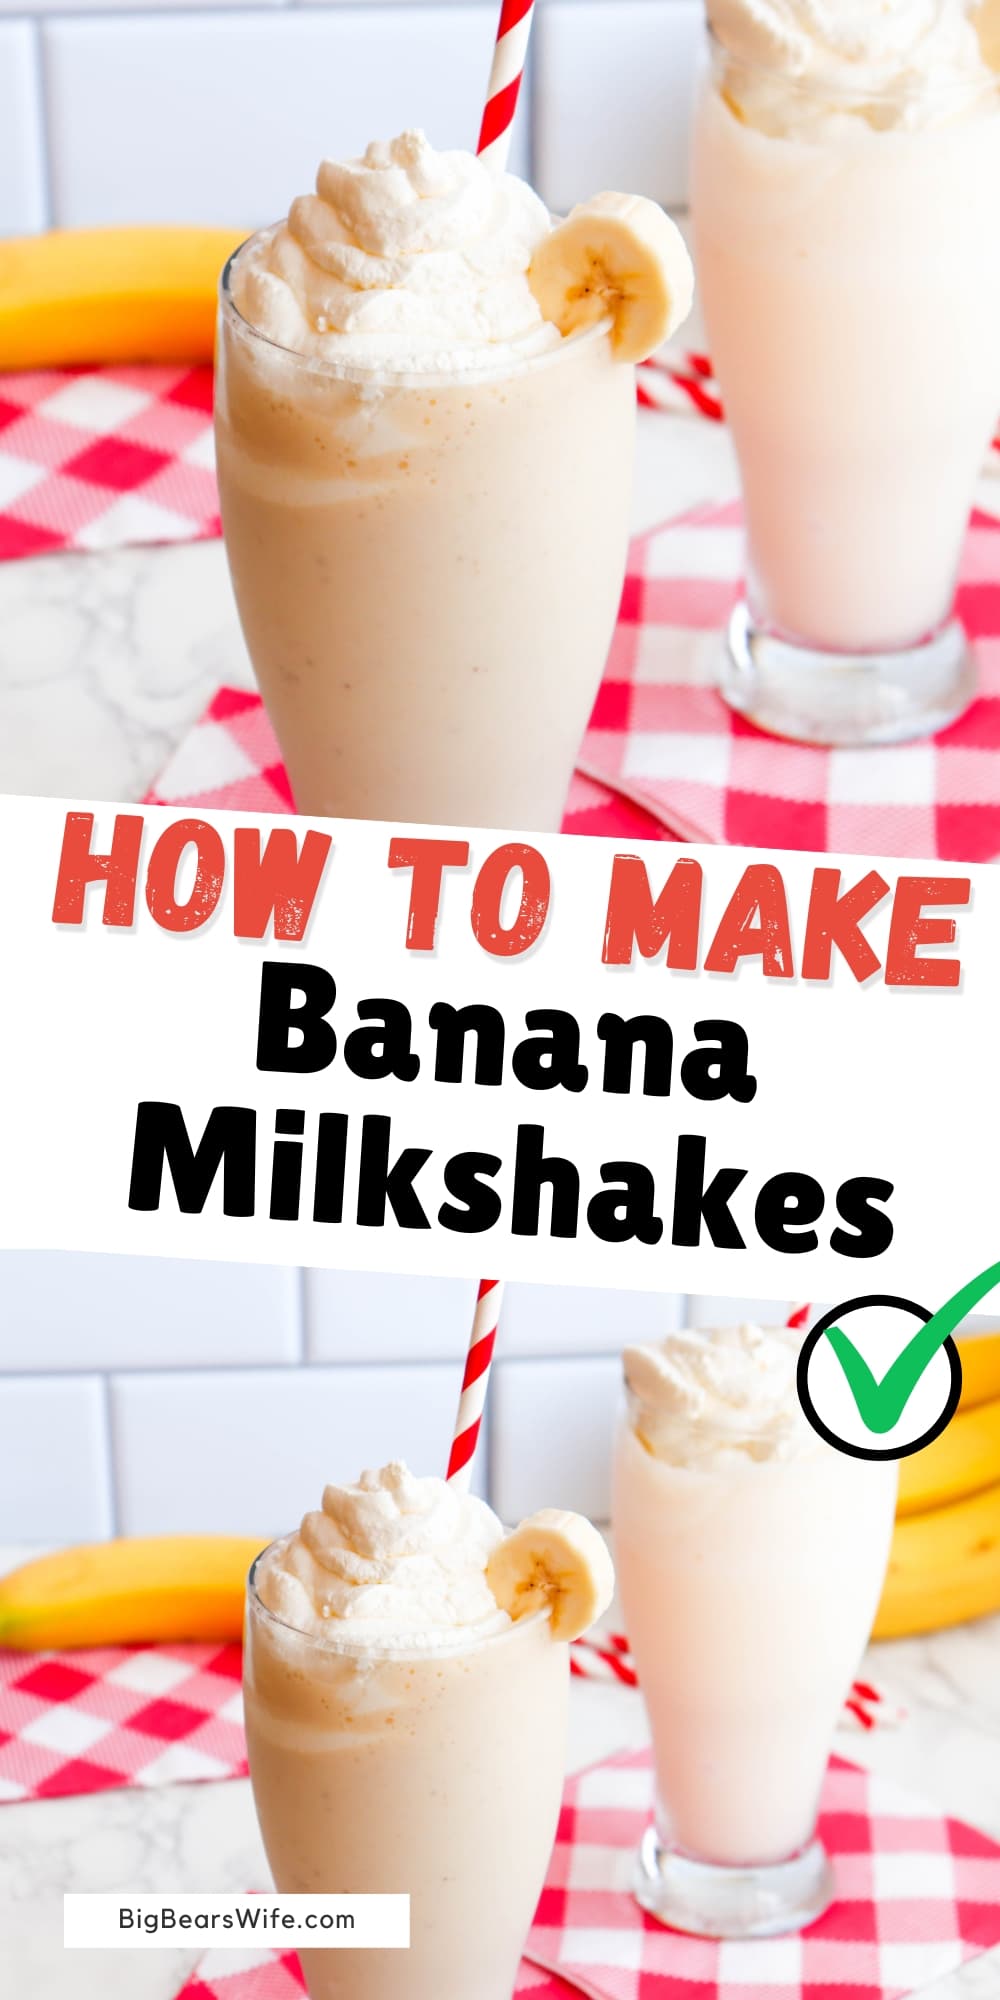 Craving something sweet and creamy? Love Bananas and Milkshakes? We’ve got the perfect dessert for you! These homemade banana milkshakes are delicious, creamy and so easy to make! via @bigbearswife